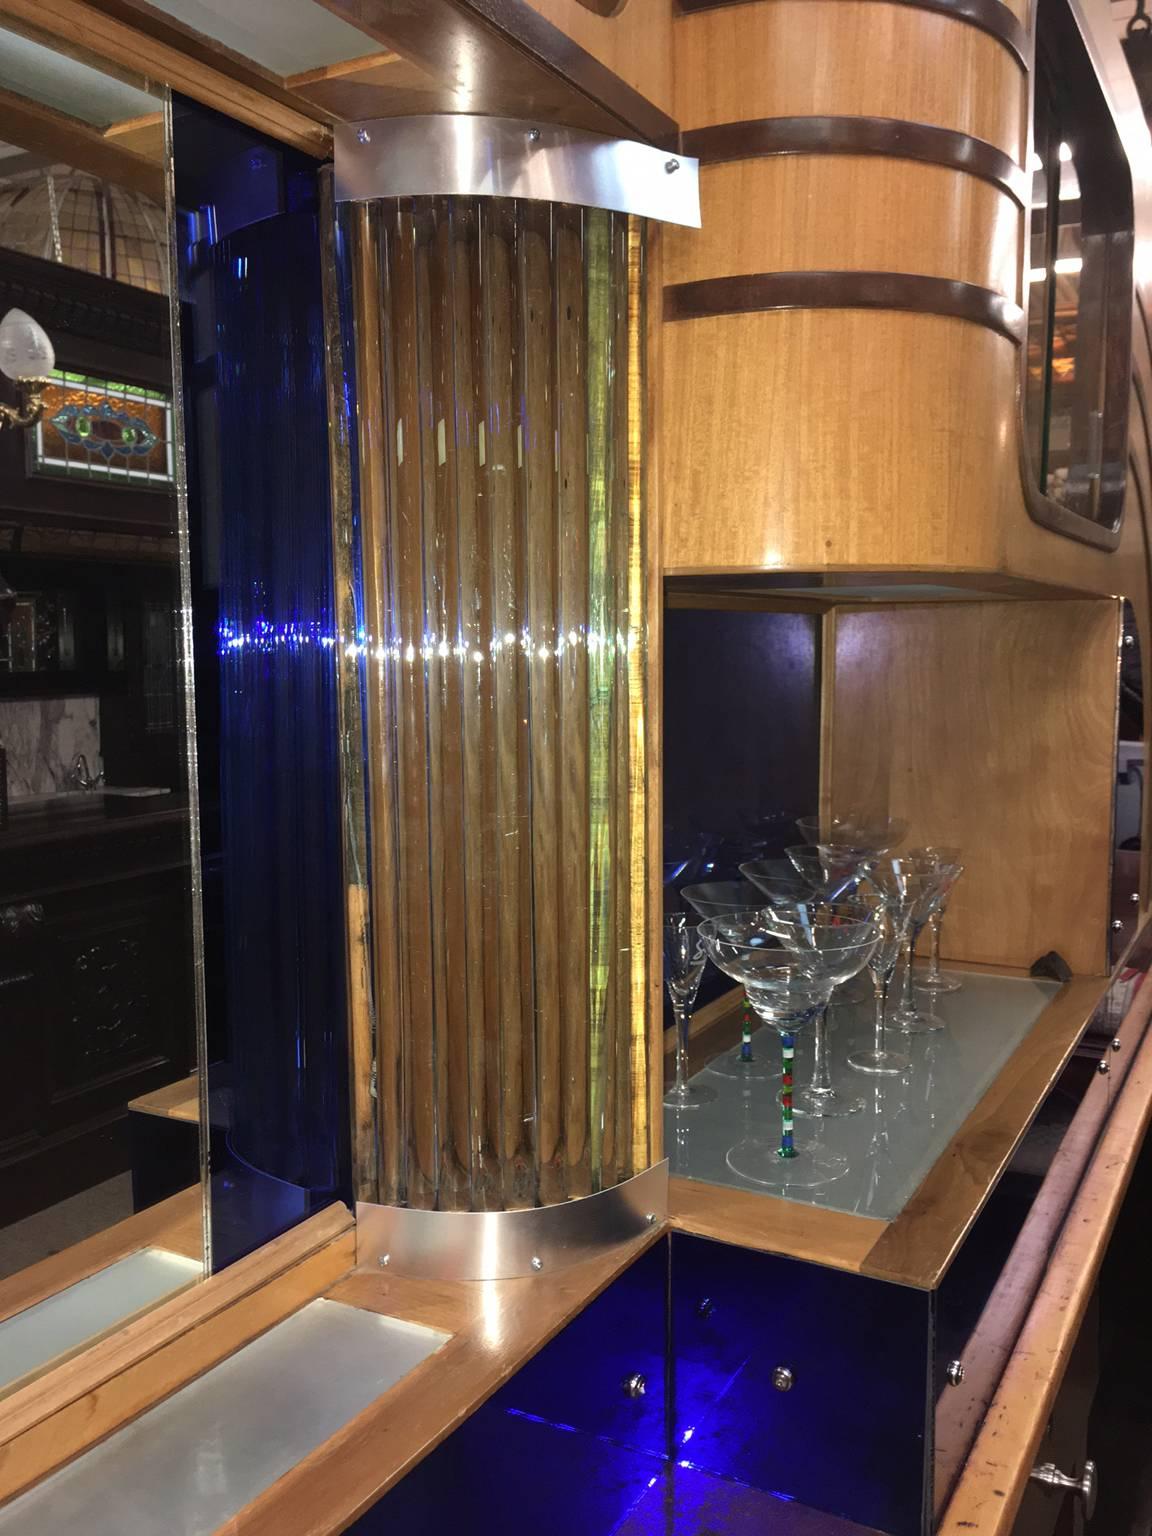 Two-toned walnut, mahogany and birch deco bar with original blue and regular glass mirrors, cabinets, shelving, showcases and glass rods. Fantastic period look and ready to go!